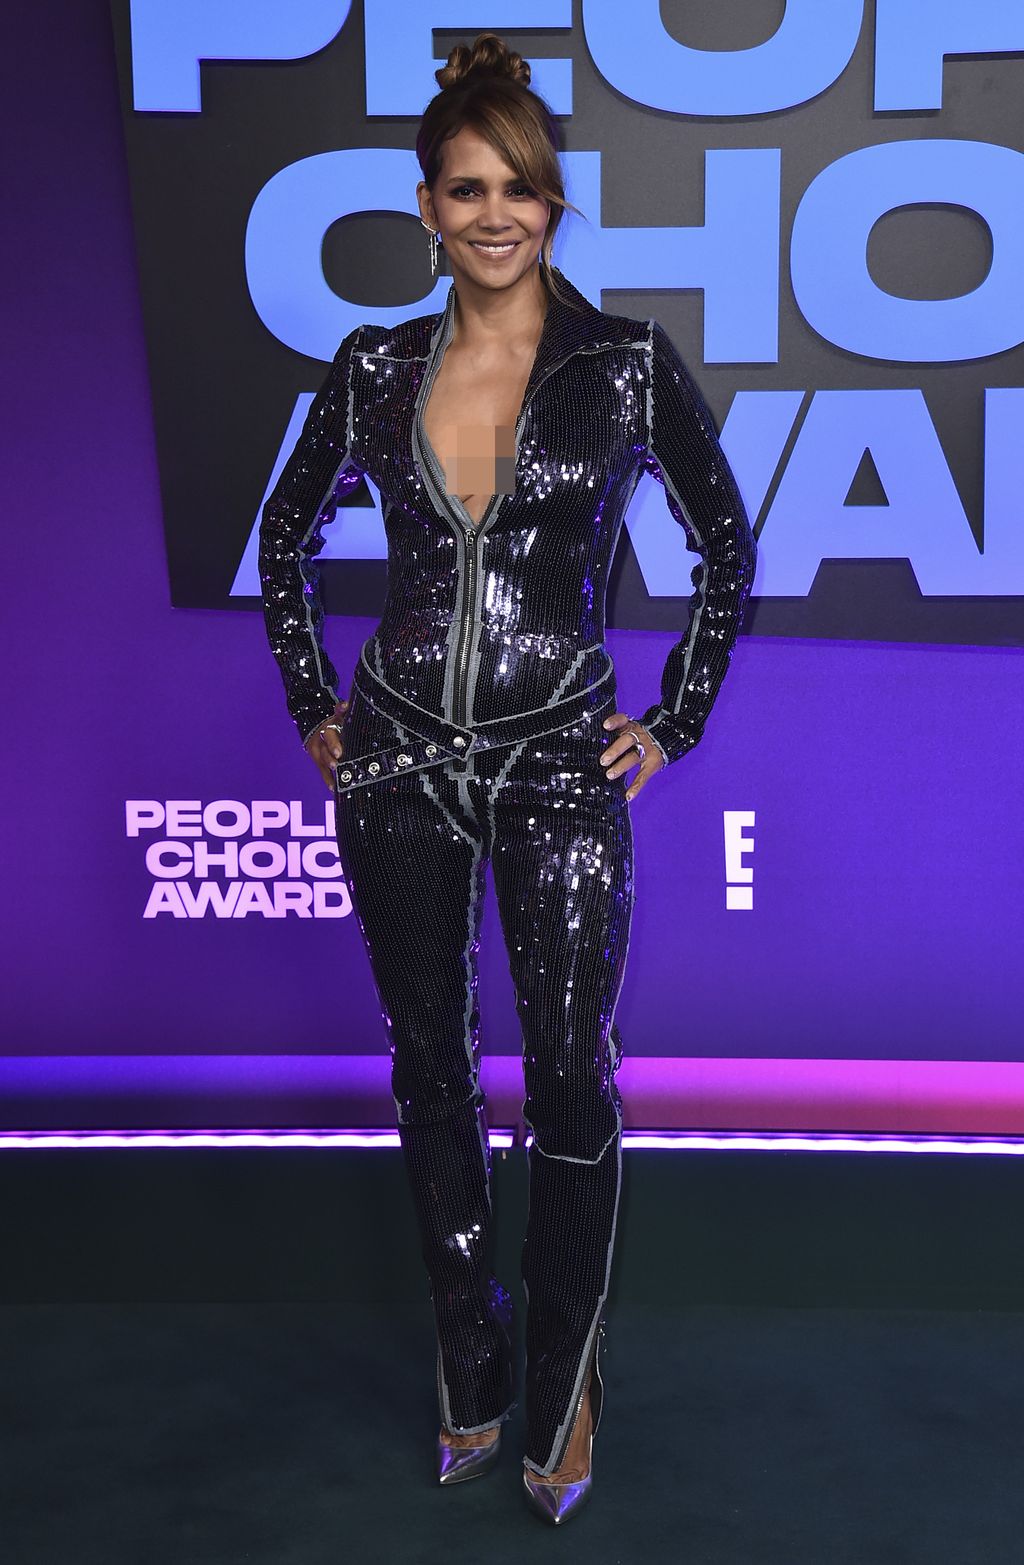 Halle Berry arrives at the People's Choice Awards on Tuesday, Dec. 7, 2021, at the Barker Hangar in Santa Monica, Calif. (Photo by Jordan Strauss/Invision/AP)